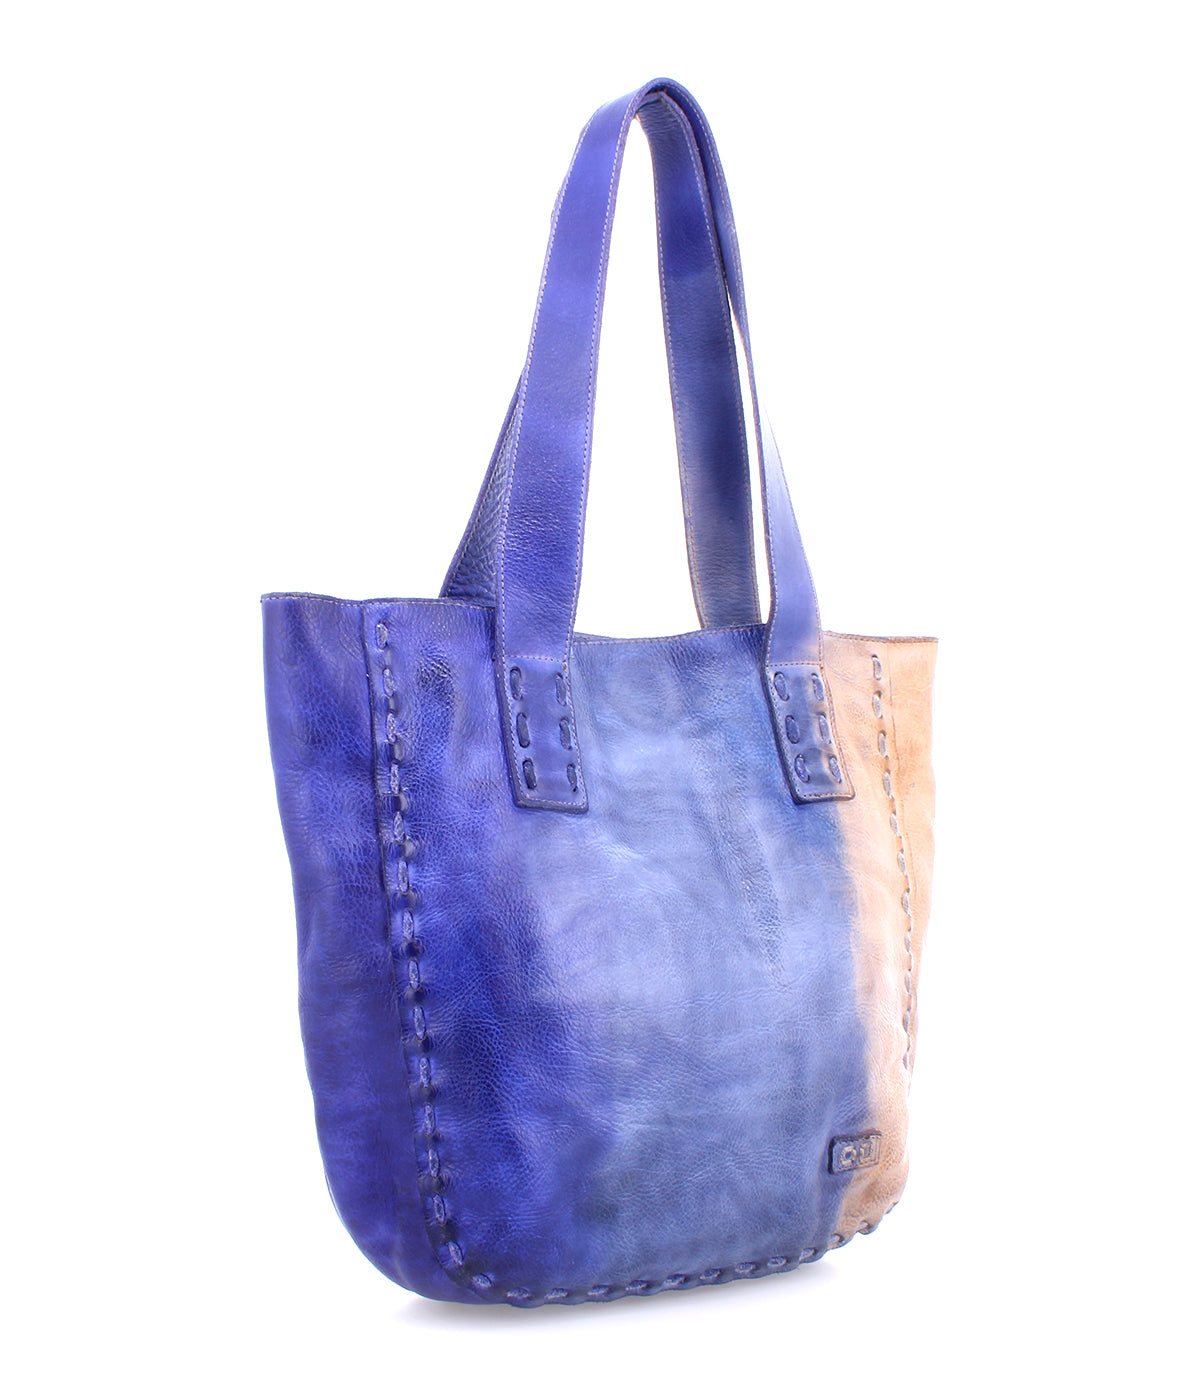 A vintage-chic blue leather Stevie tote bag crafted with old-world sophistication by Bed Stu.